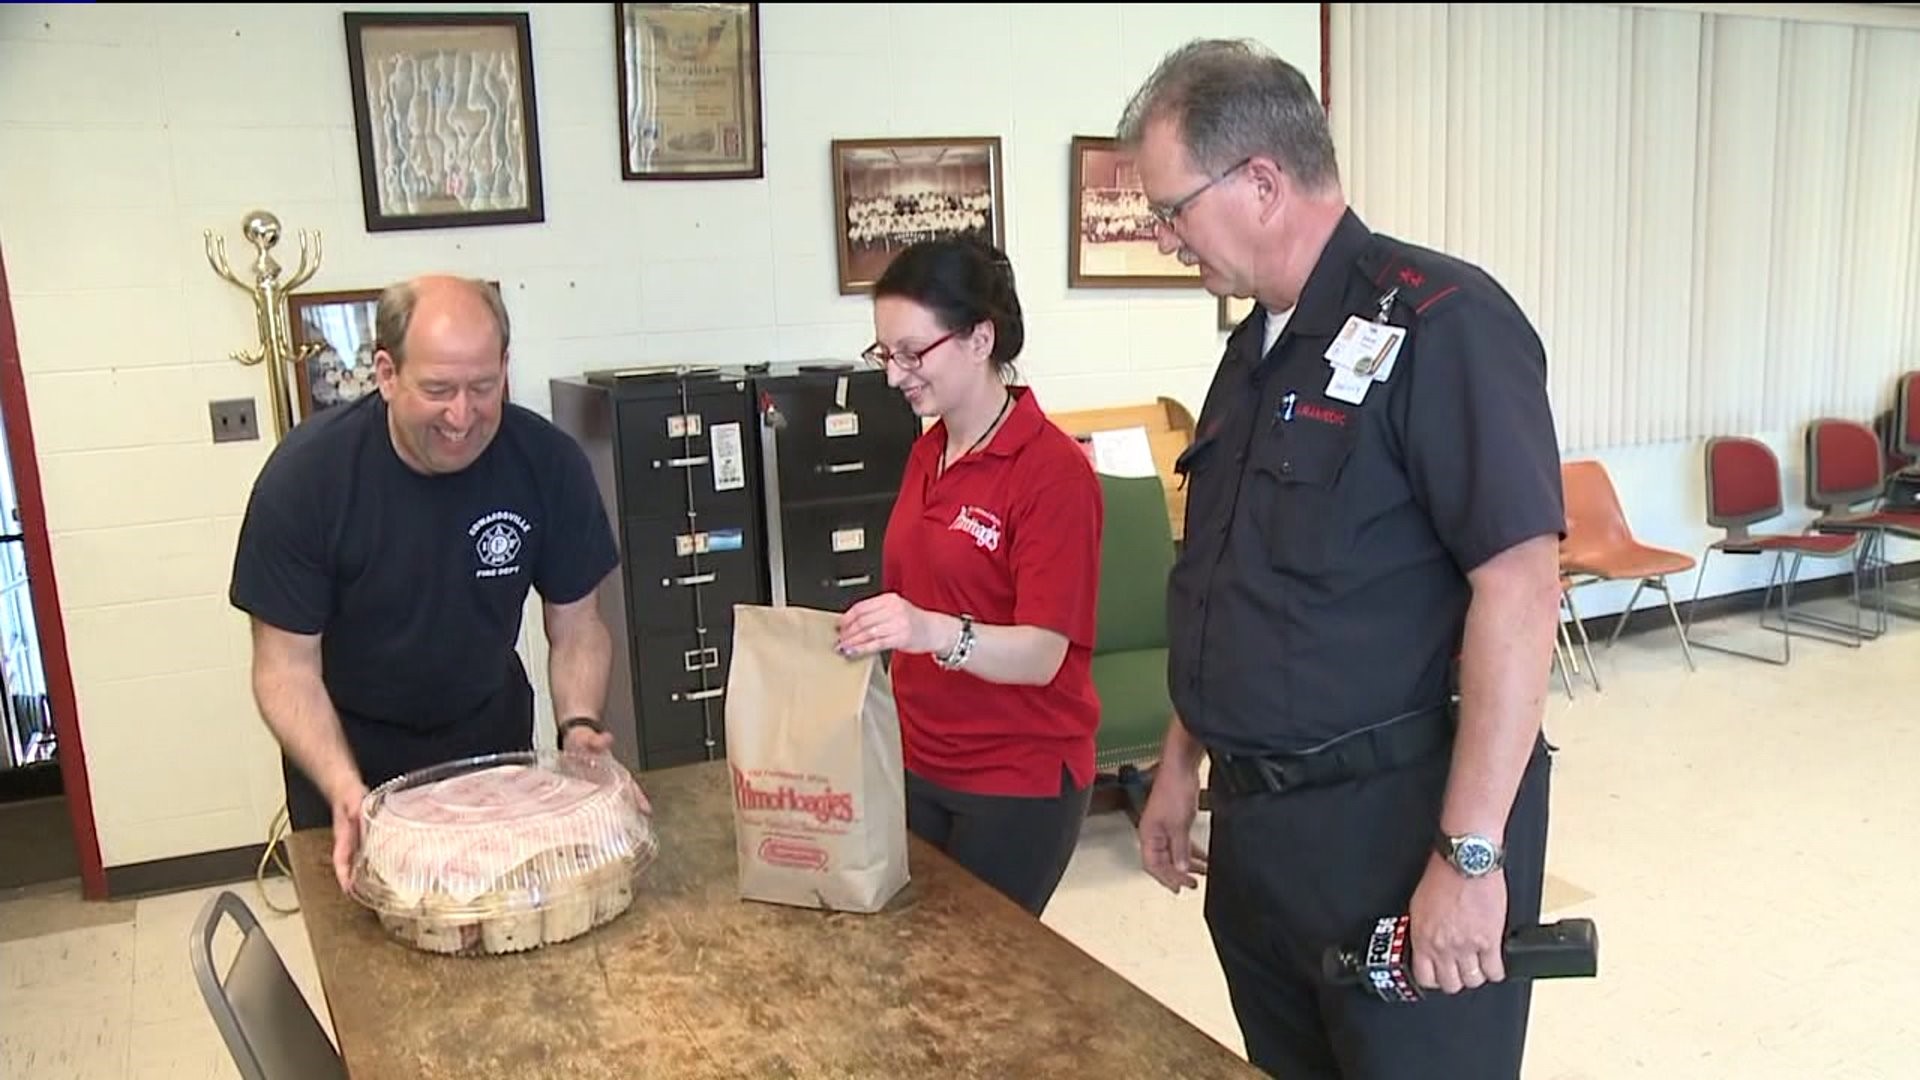 Free Hoagies for First Responders for National Hoagie Day